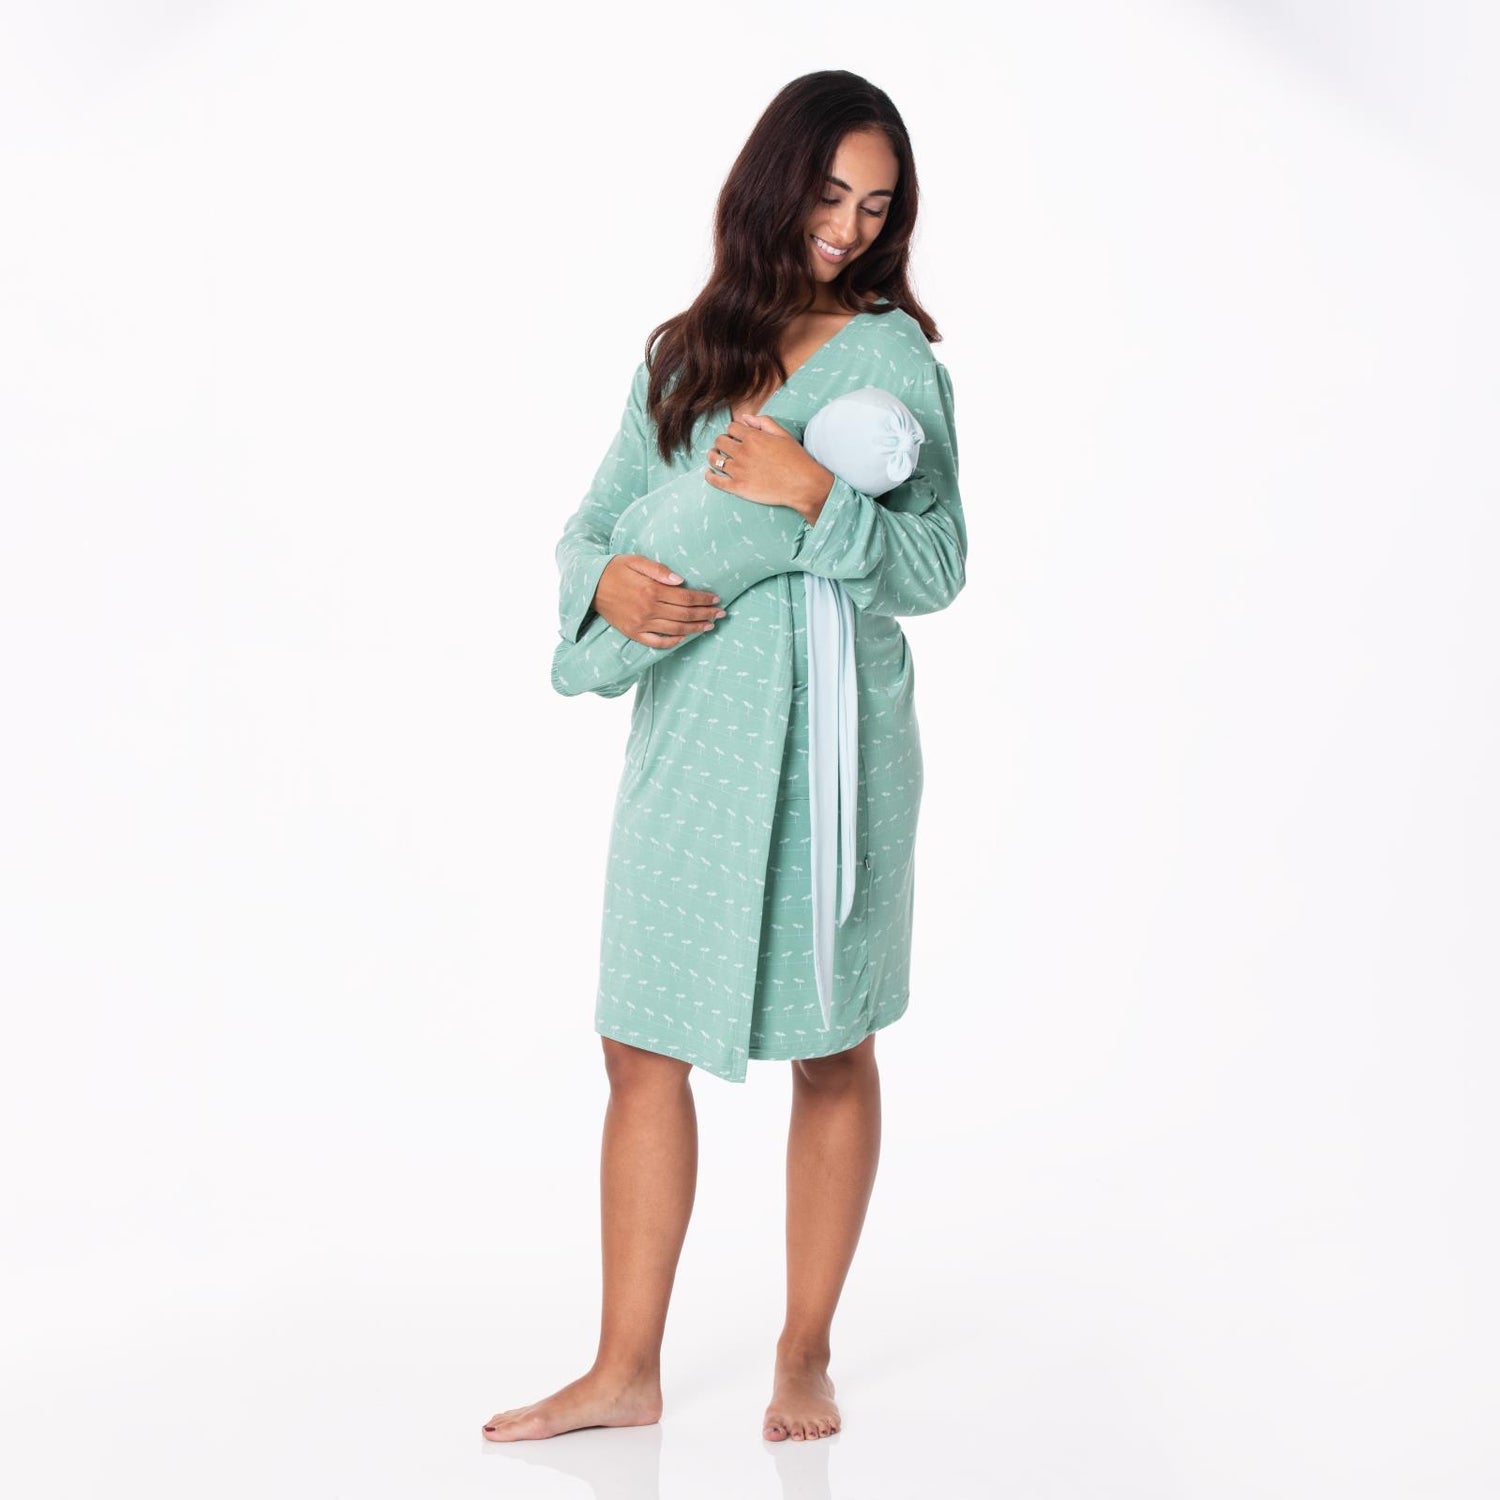 Women's Mid Length Lounge Robe & Layette Gown Set in Shore Sprouts